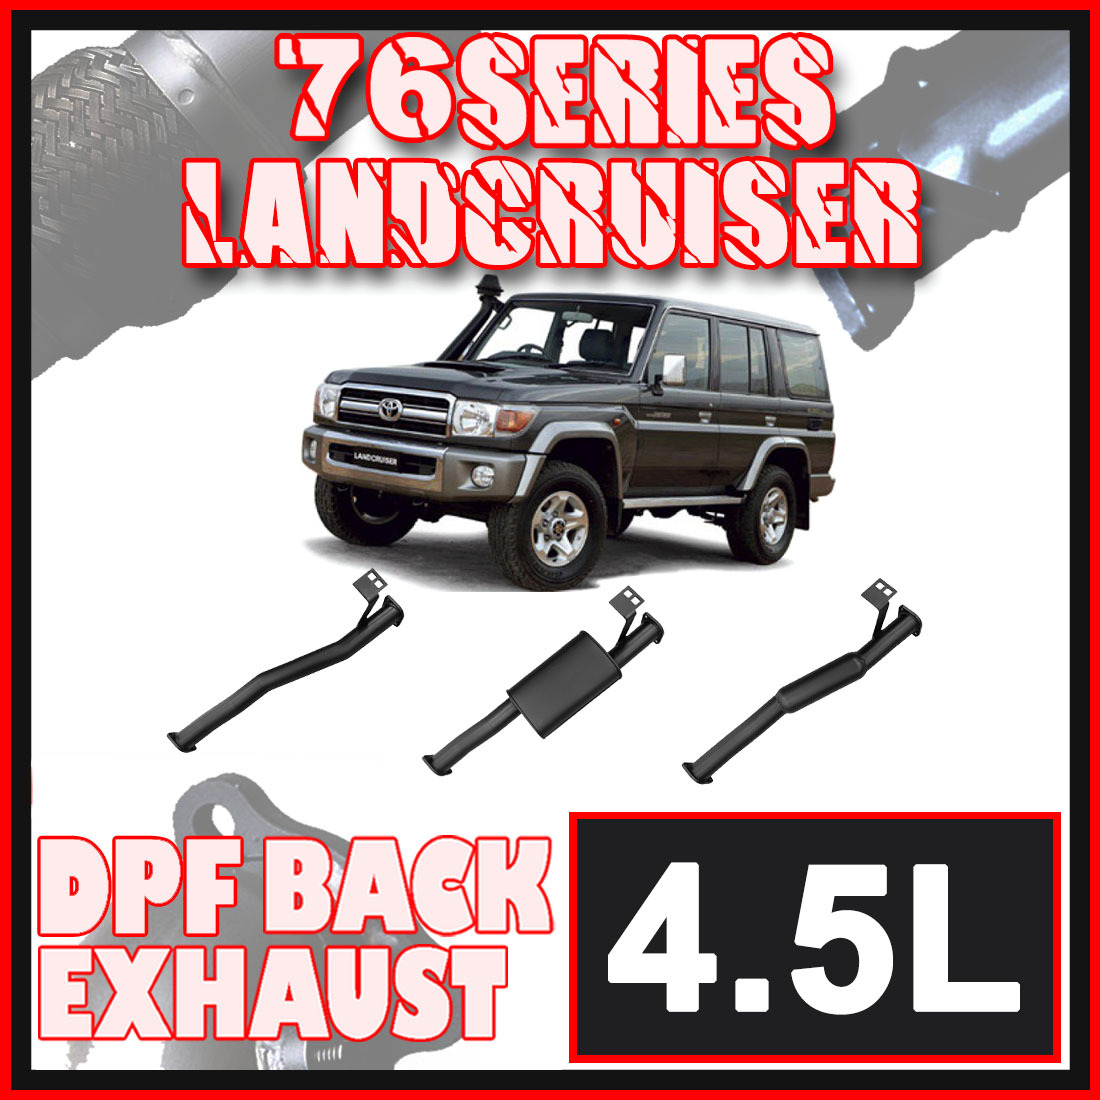 Toyota Landcruiser Exhaust 76 Series Wagon 3" DPF Back Systems image